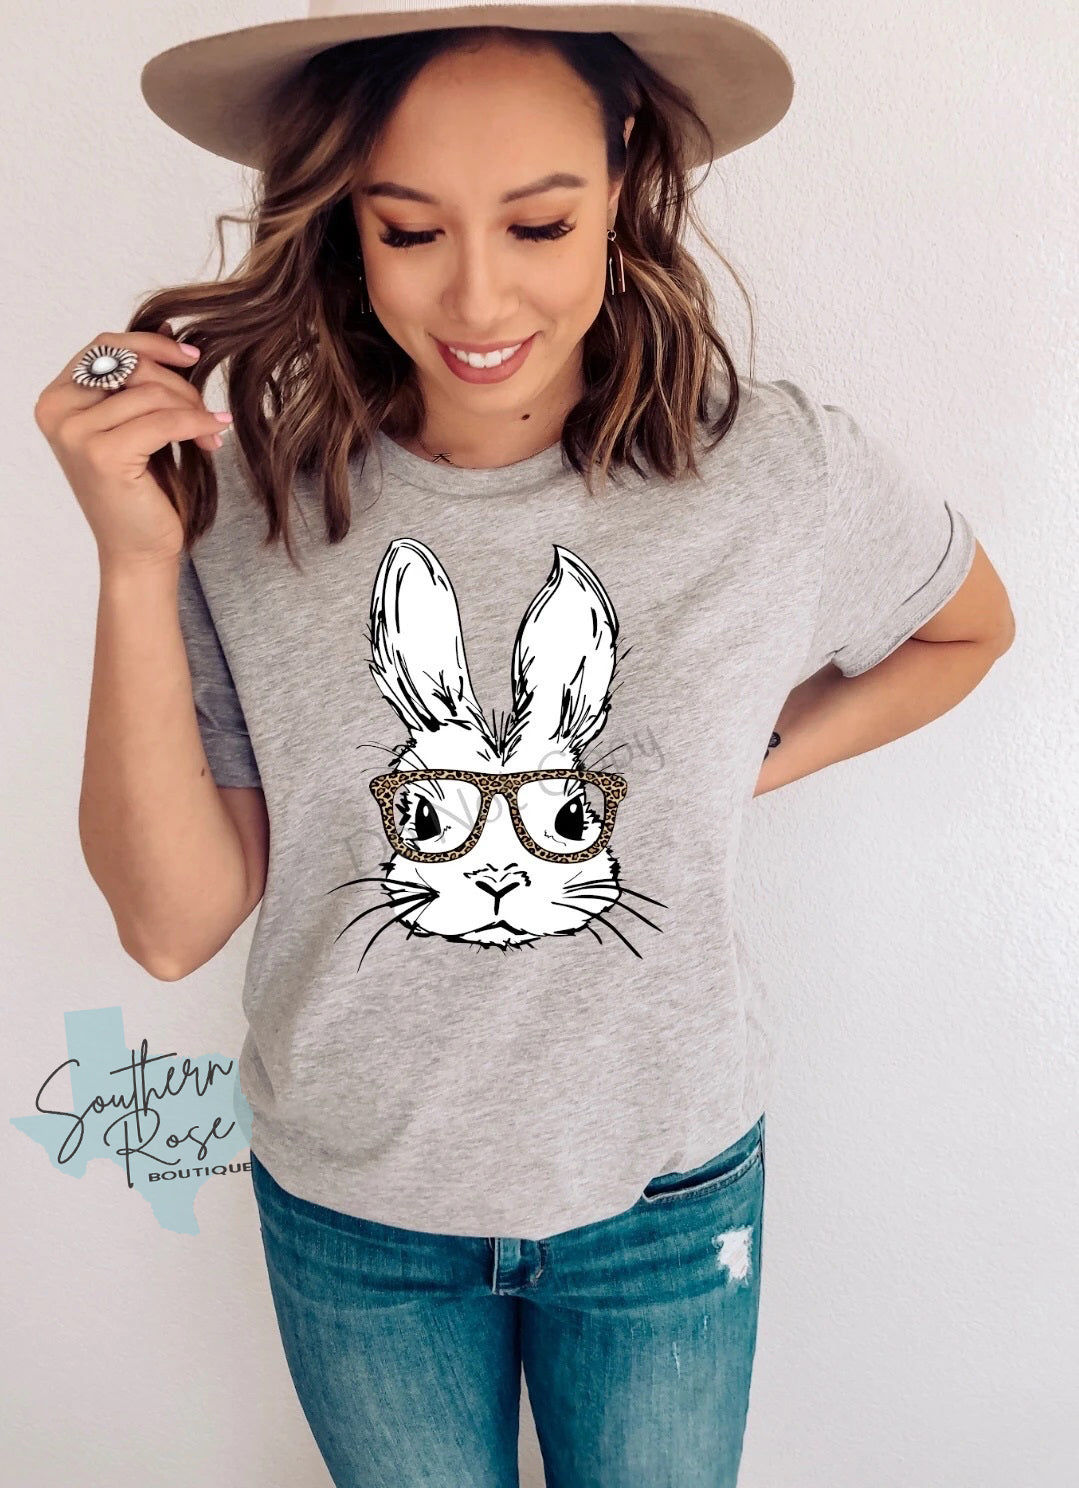 Spectacle Bunny - Adult